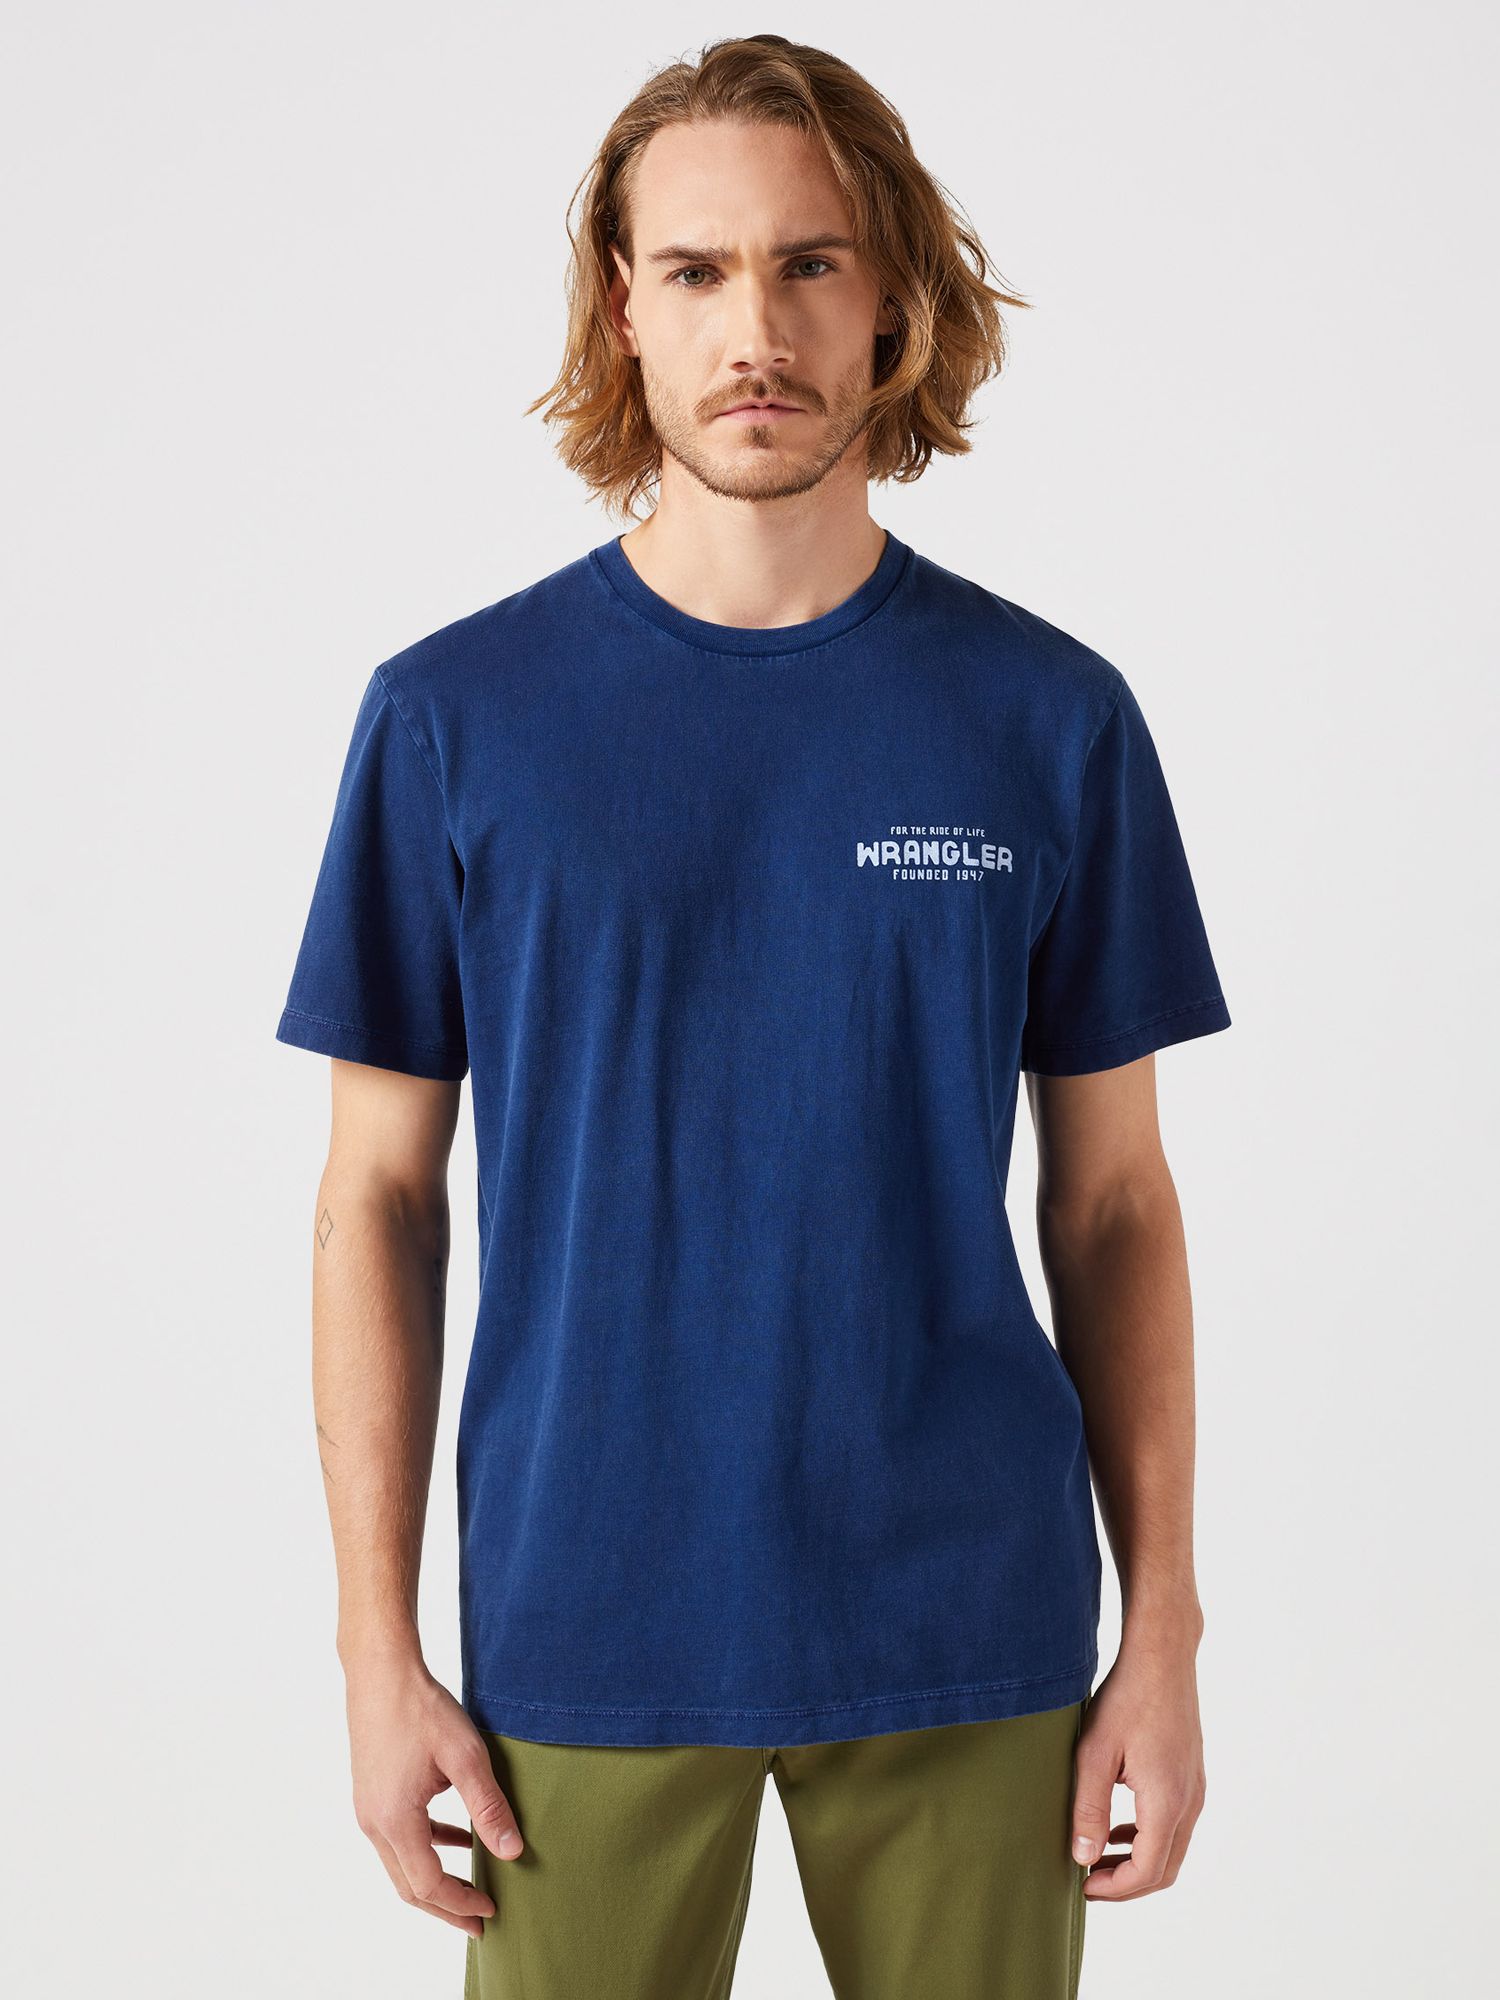 Buy Wrangler Small Graphic T-Shirt, Navy Online at johnlewis.com